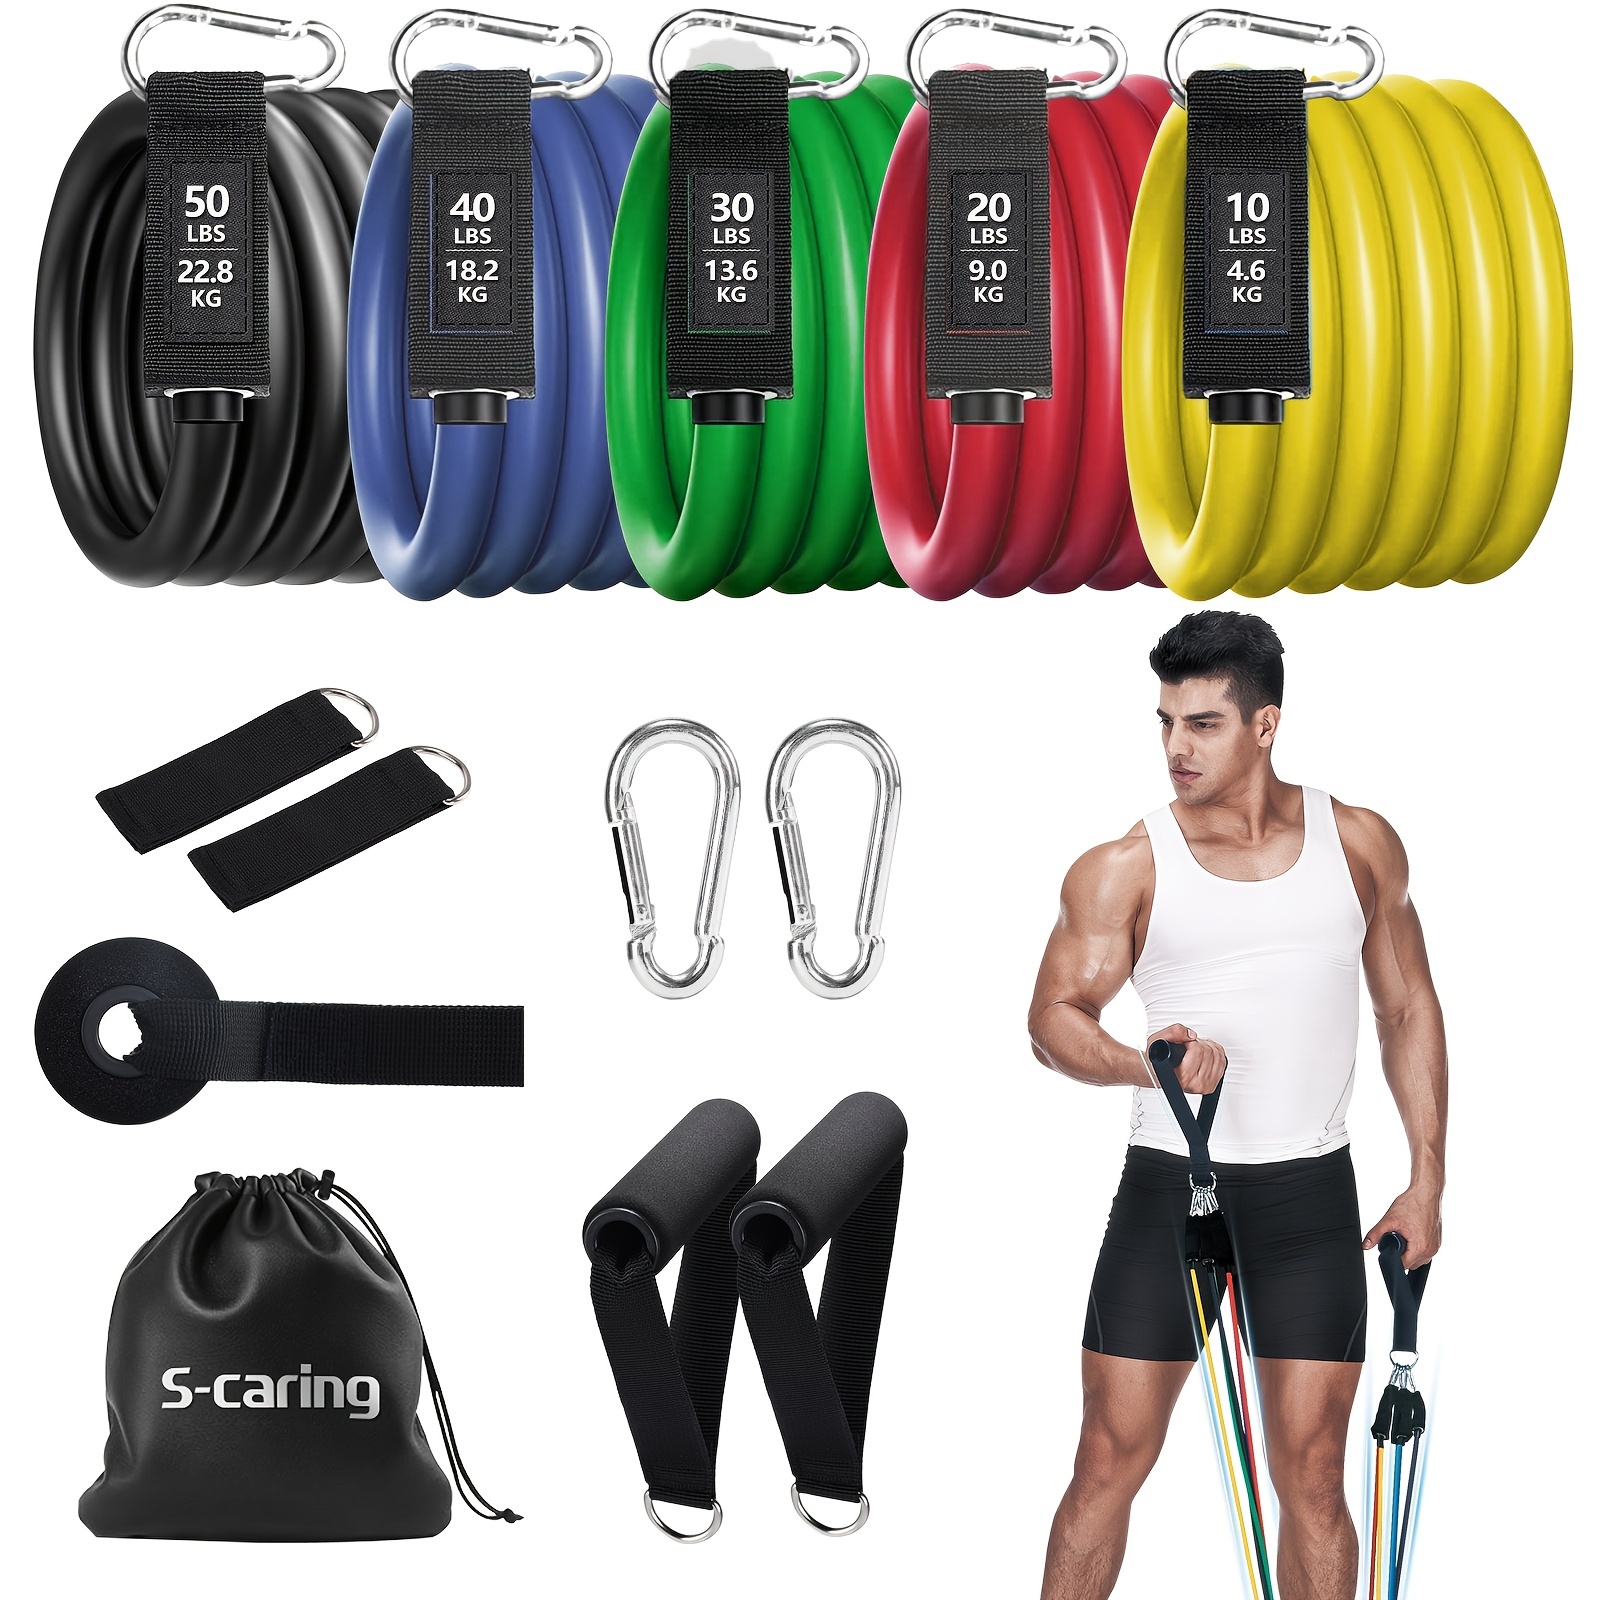 * Unisex Exercise Bands Set: Resistance Bands for Strength Training,  Pilates, Physiotherapy & Fitness - Up to 150 Lbs!